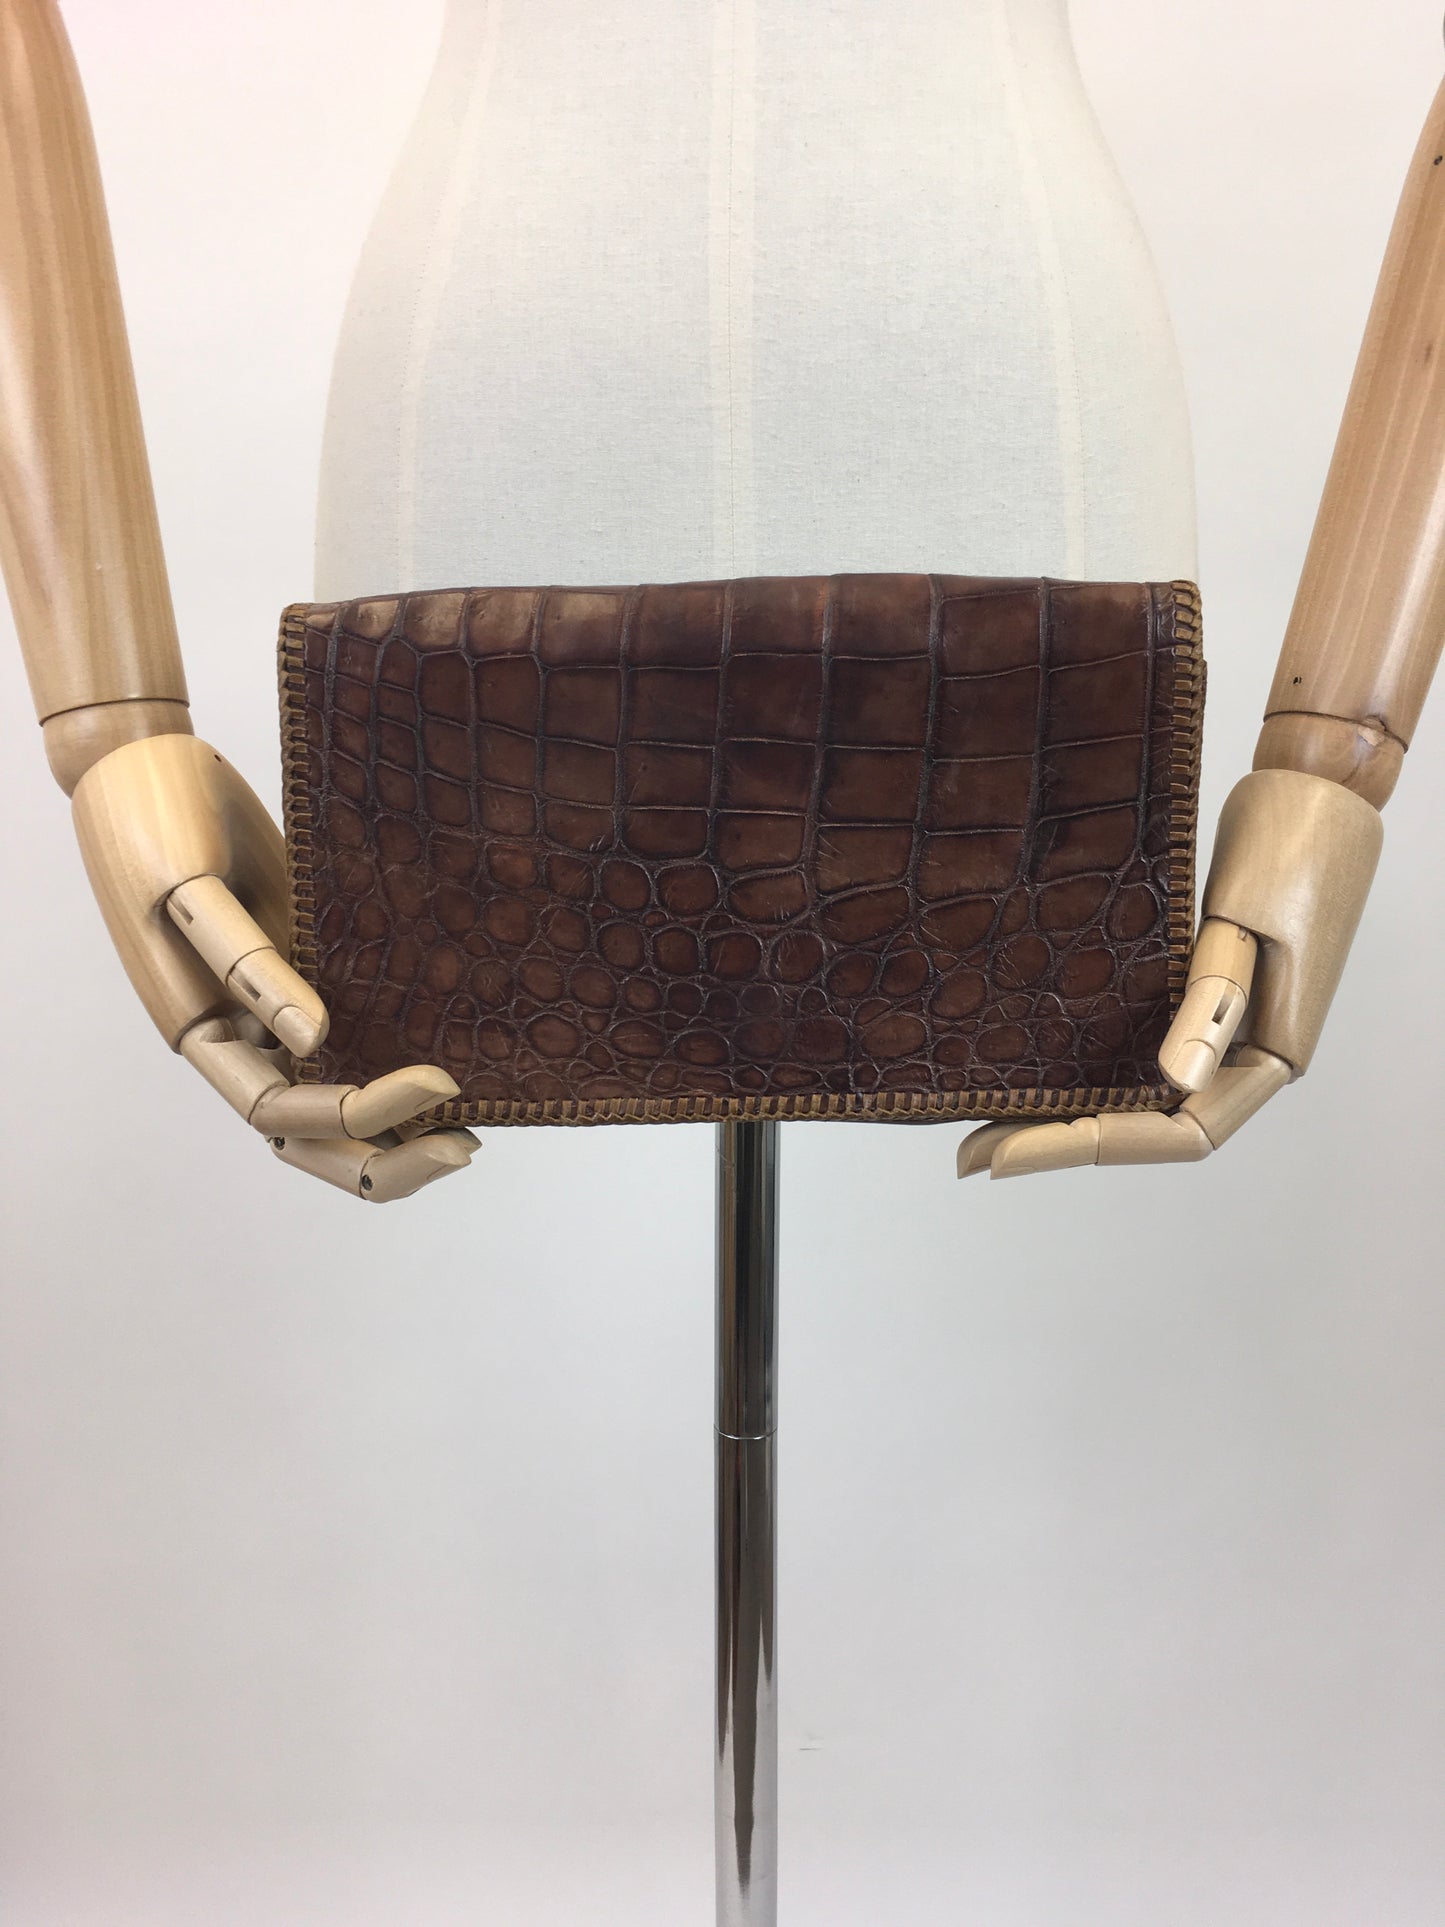 Original 1930's Classic Leather Clutch Handbag - With Handy Internal Compartments